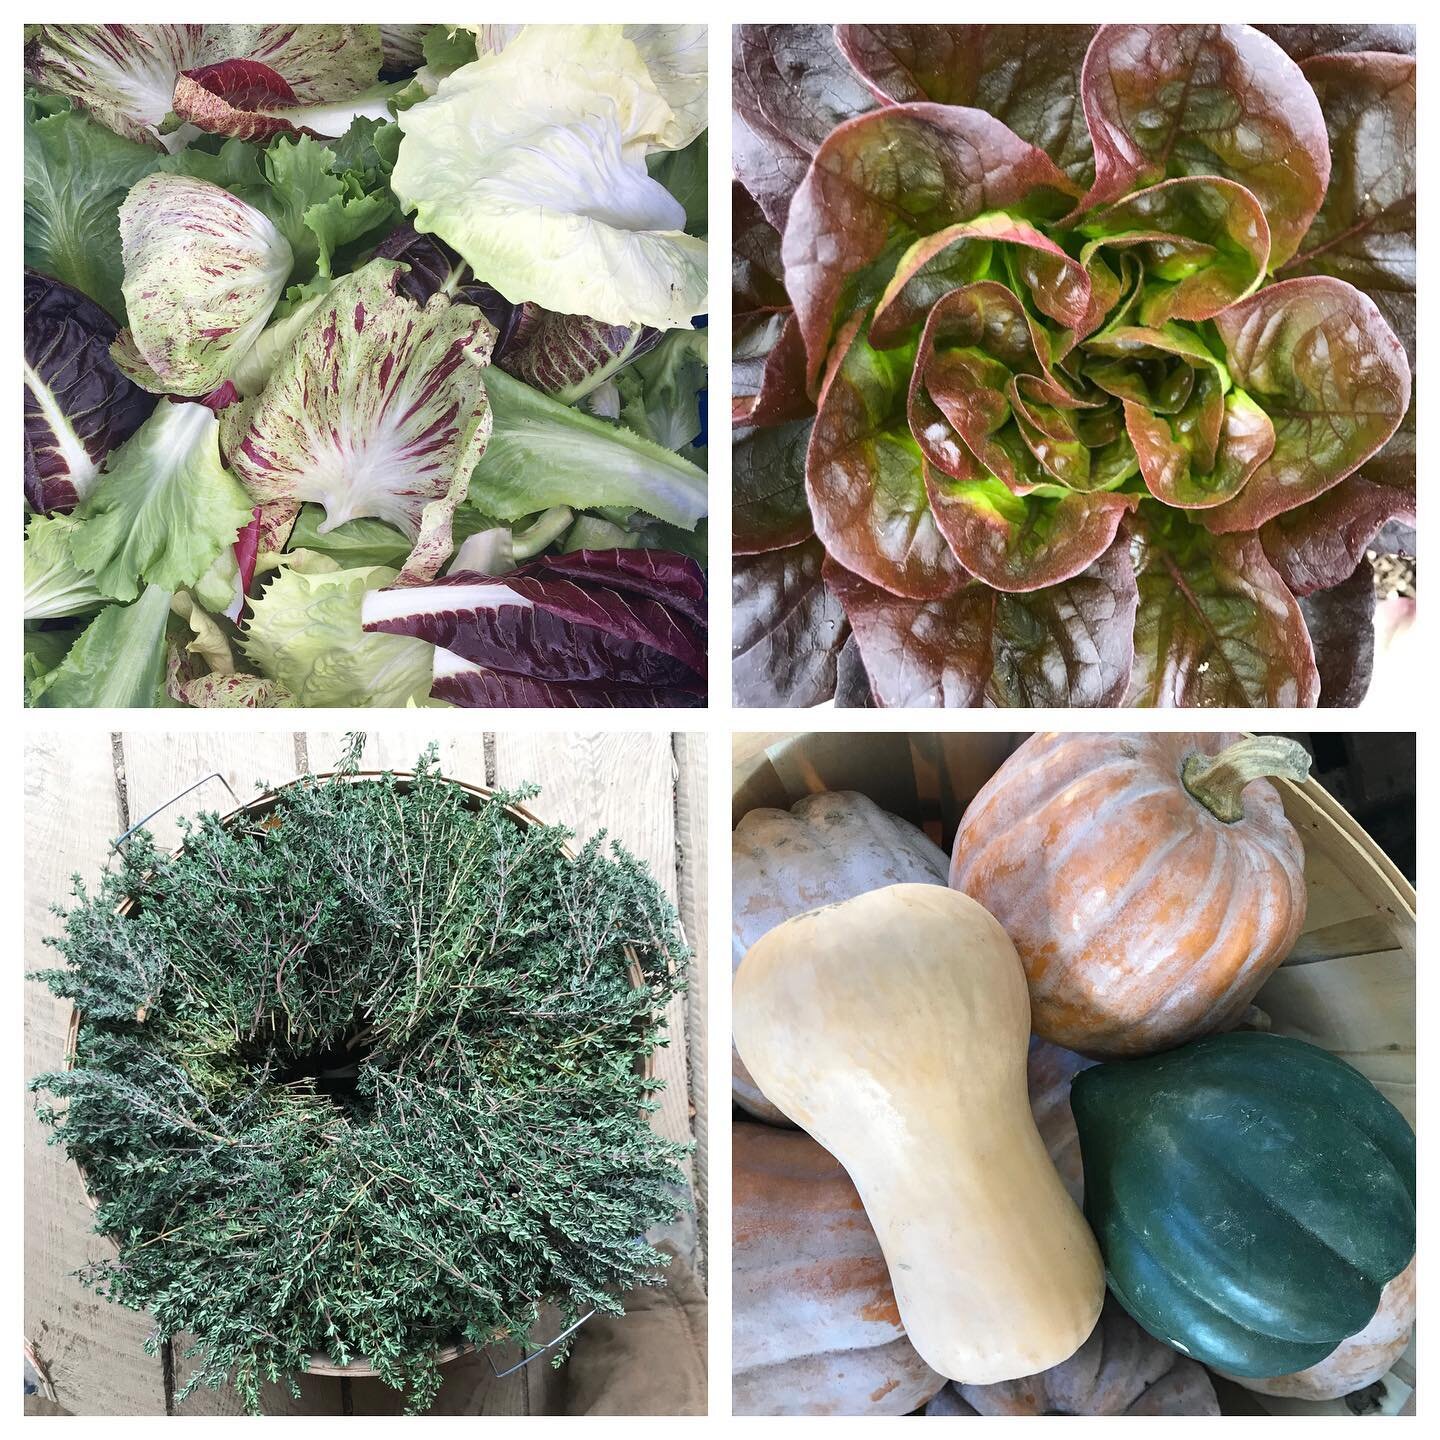 Online ordering open until Thursday noon for Saturday 11/21 curbside pick up at the farm- link in bio. @strawsfarm and @hootenannybread too l#thanksgiving #morningdewfarmmaine #mofgacertifiedorganic #localfood #newcastlemaine